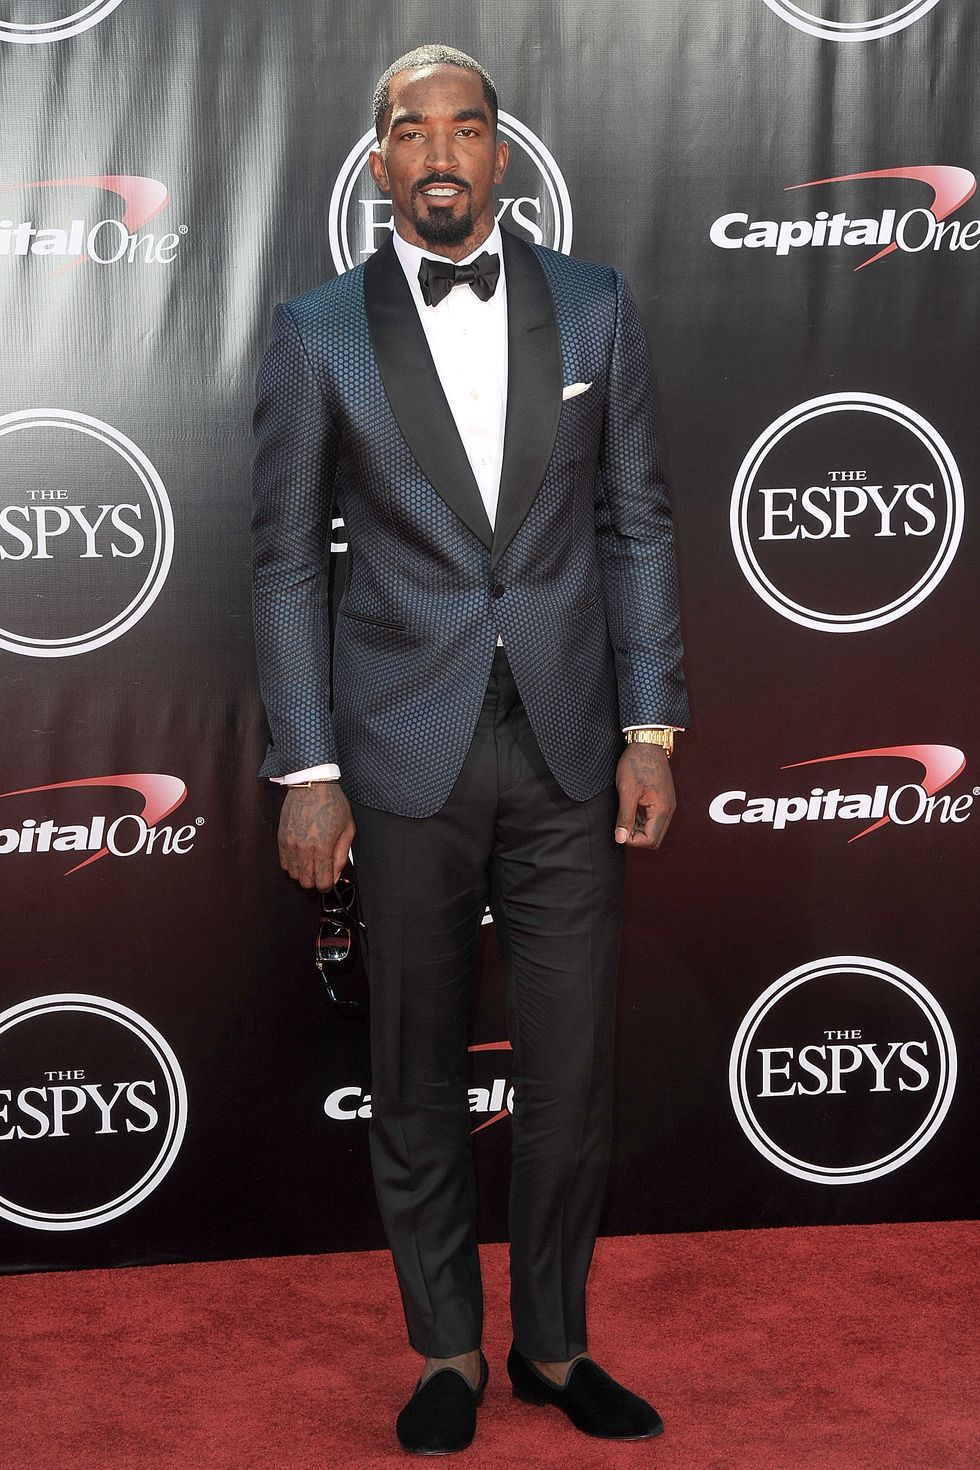 7 of NBA's Top Fashion Players, Plus the Stylists on Their Looks – Rvce News